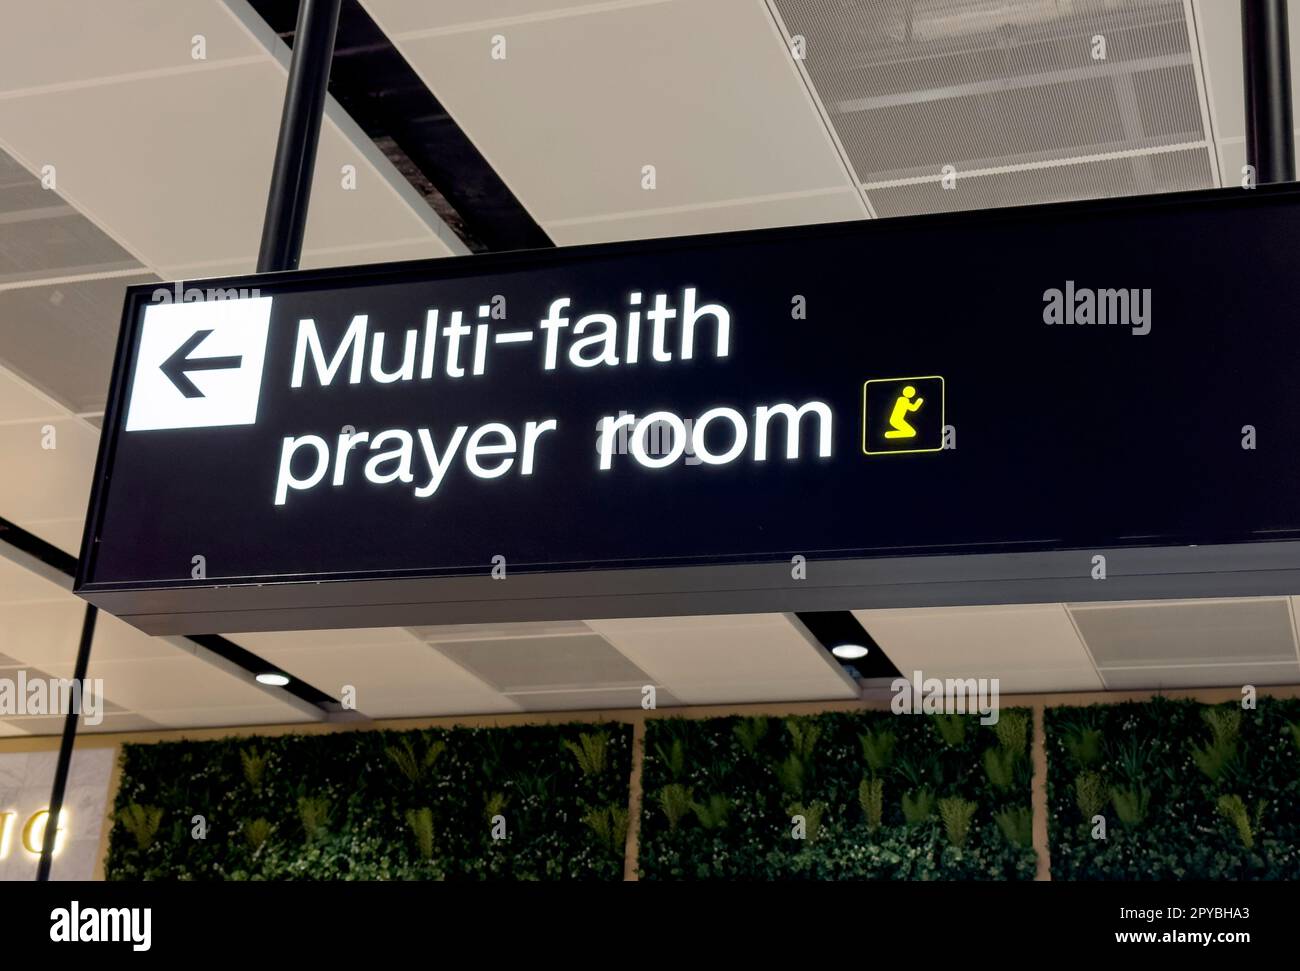 Multi-faith prayer room sign, for various faiths and religions, Manchester International Airport, terminal2, England, UK, M90 1QX Stock Photo